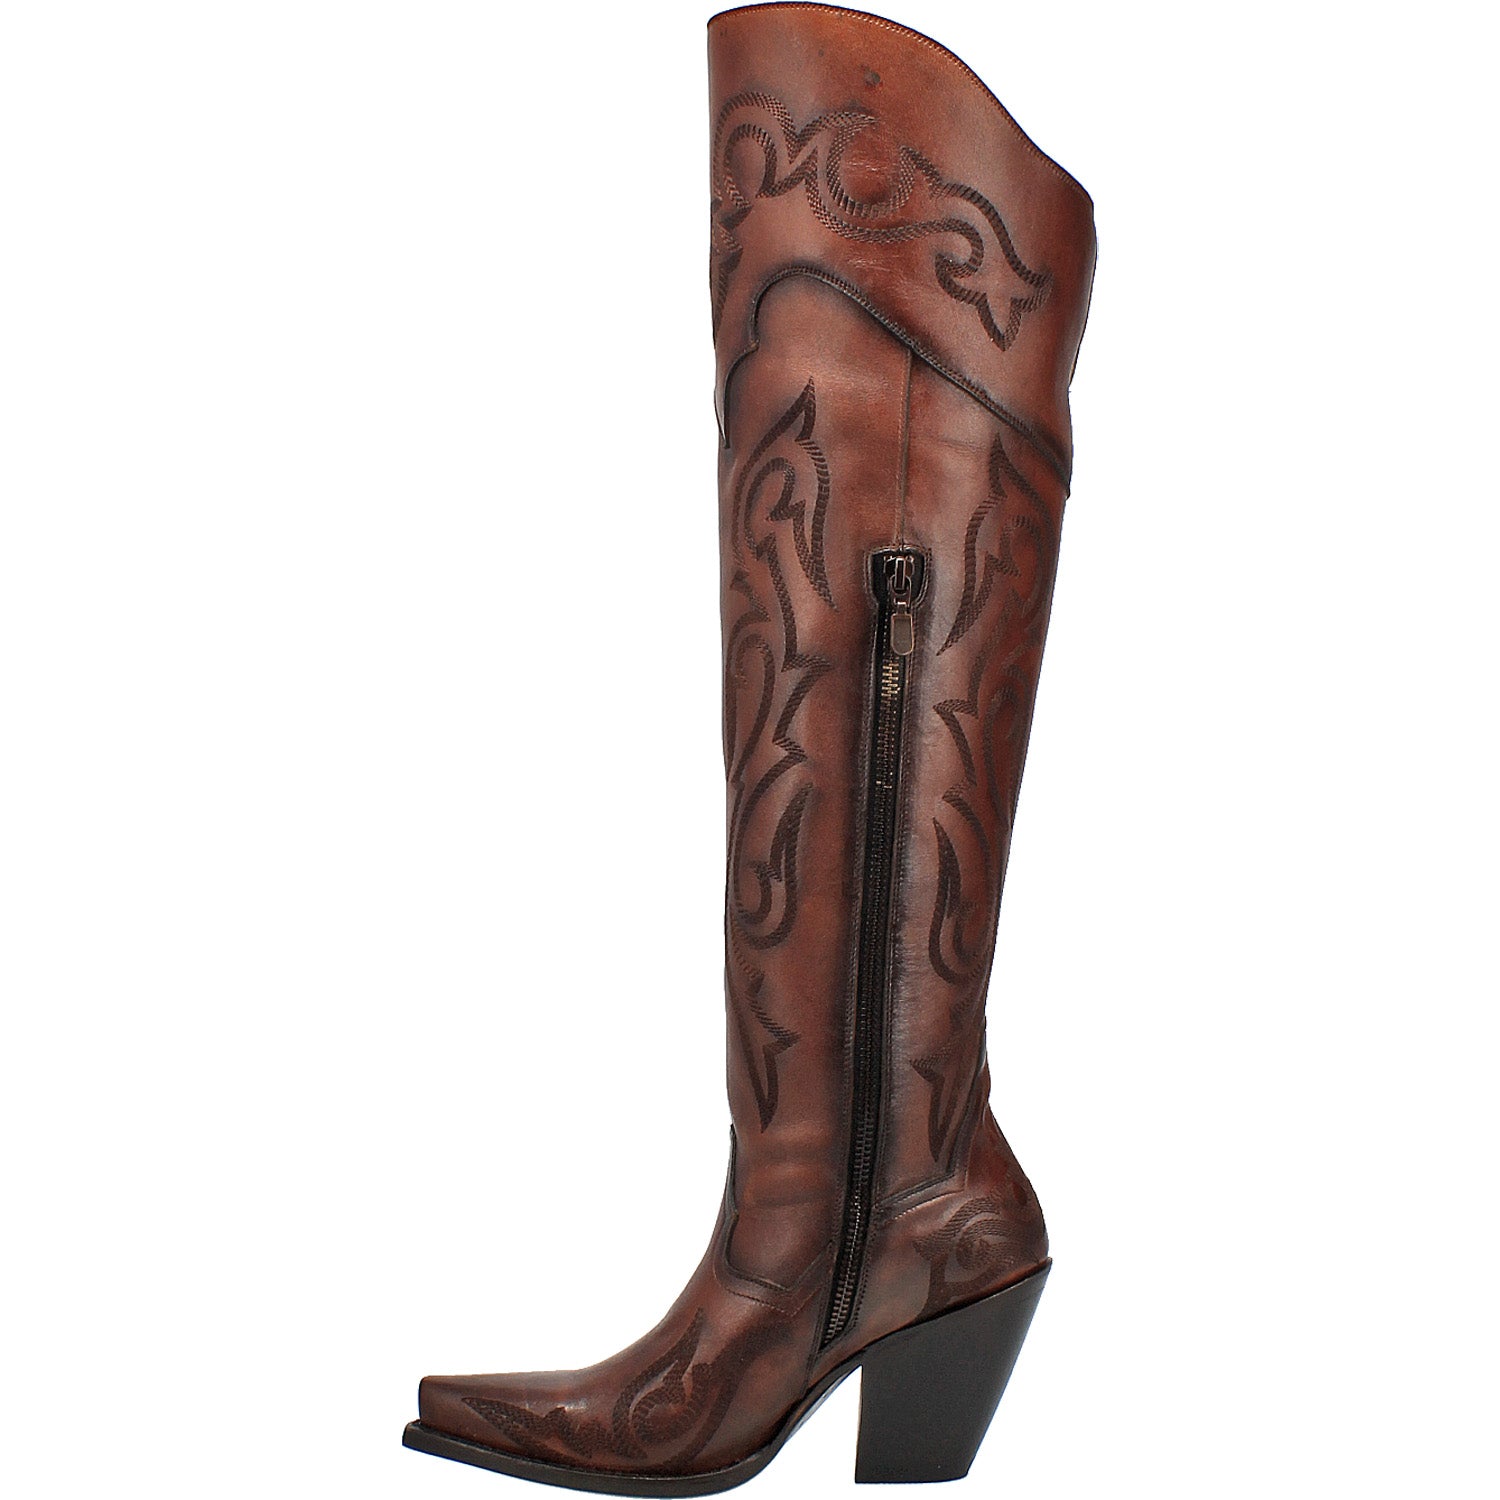 SEDUCTRESS LEATHER BOOT